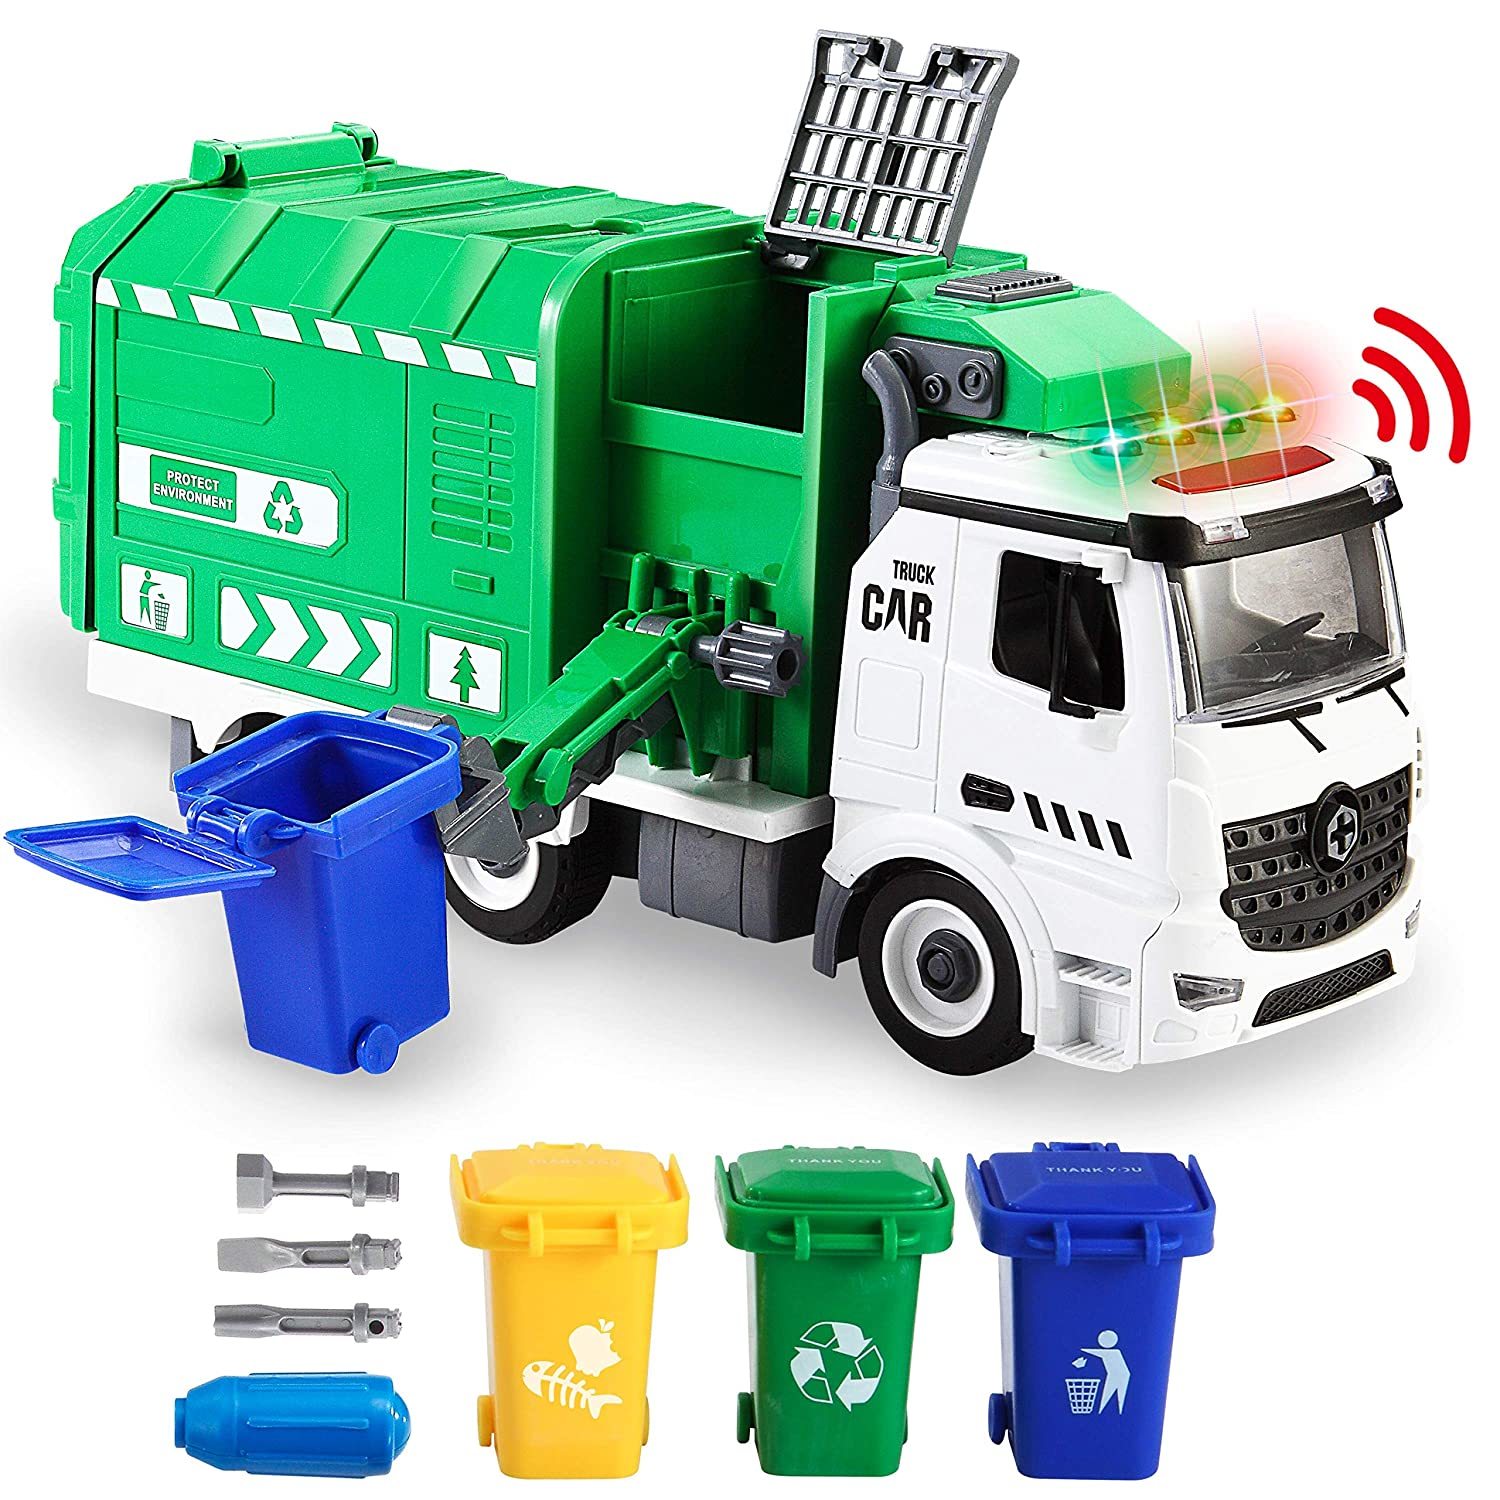 Jumbo Take Apart Friction Powered Side-Dump Recycling Garbage Truck To